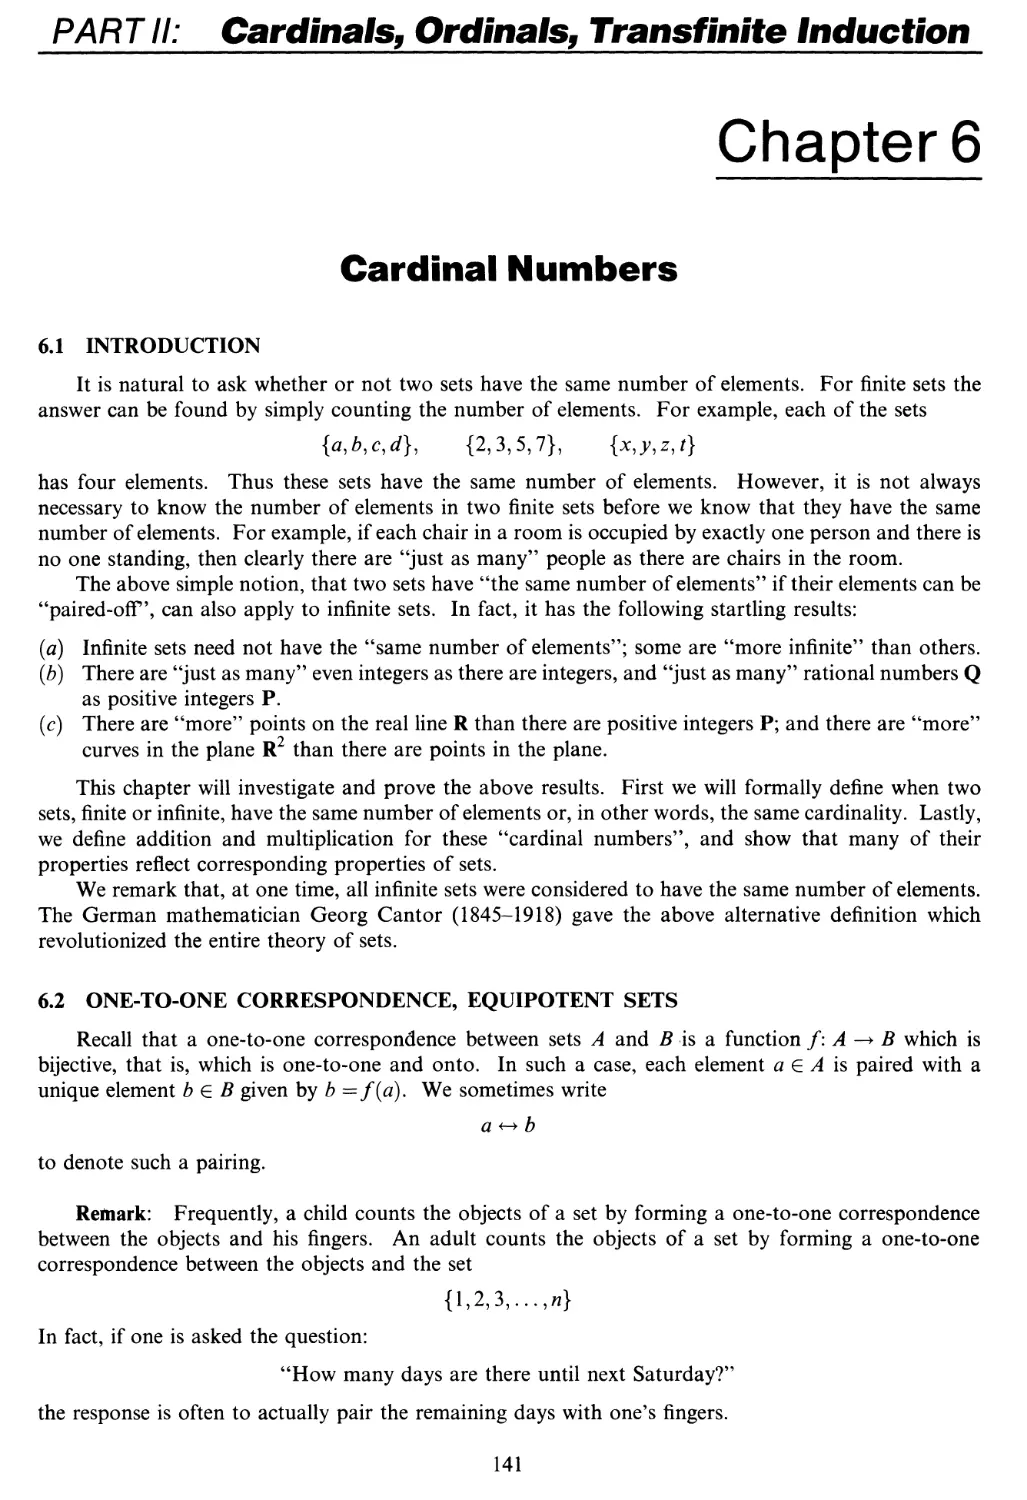 PART II Cardinals, Ordinals, Transfinite Induction
6.2 One-to-one correspondence, equipotent sets